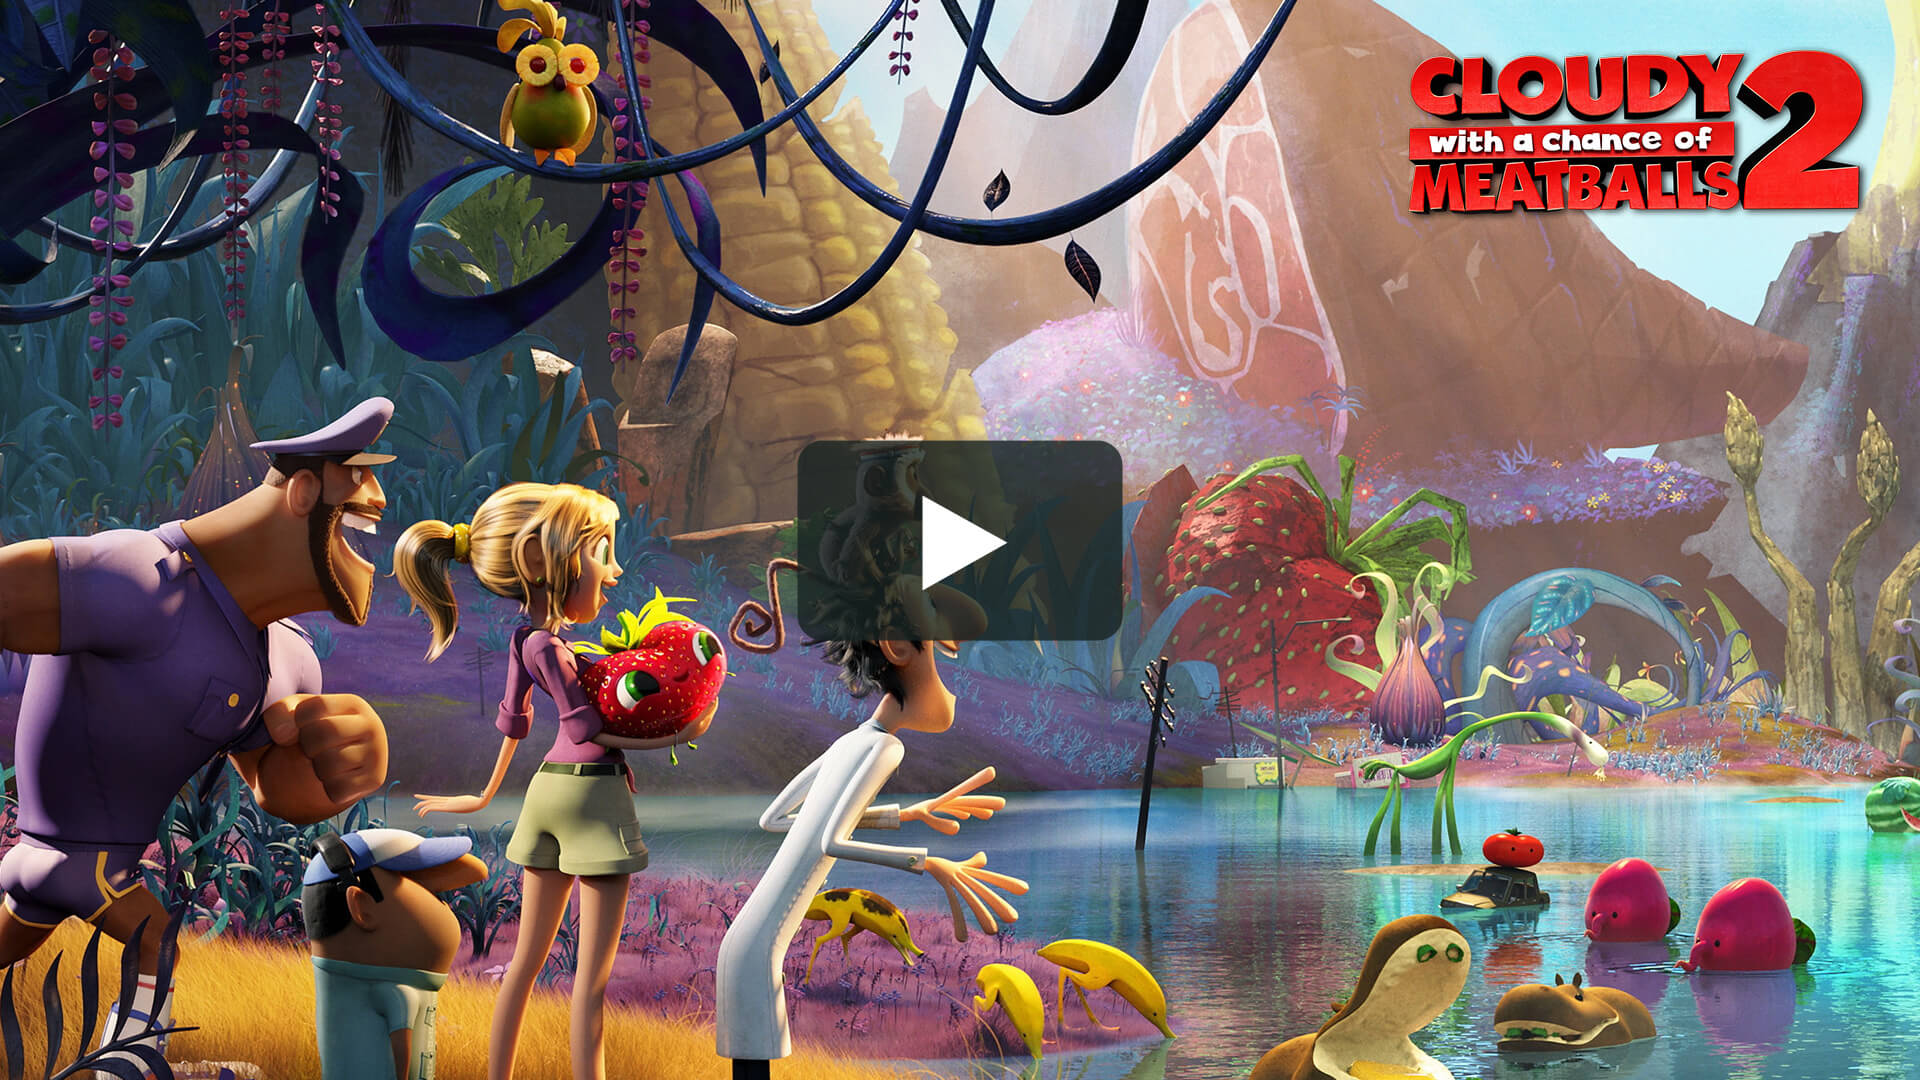 Cloudy with a Chance of Meatballs 2 - 天降美食2